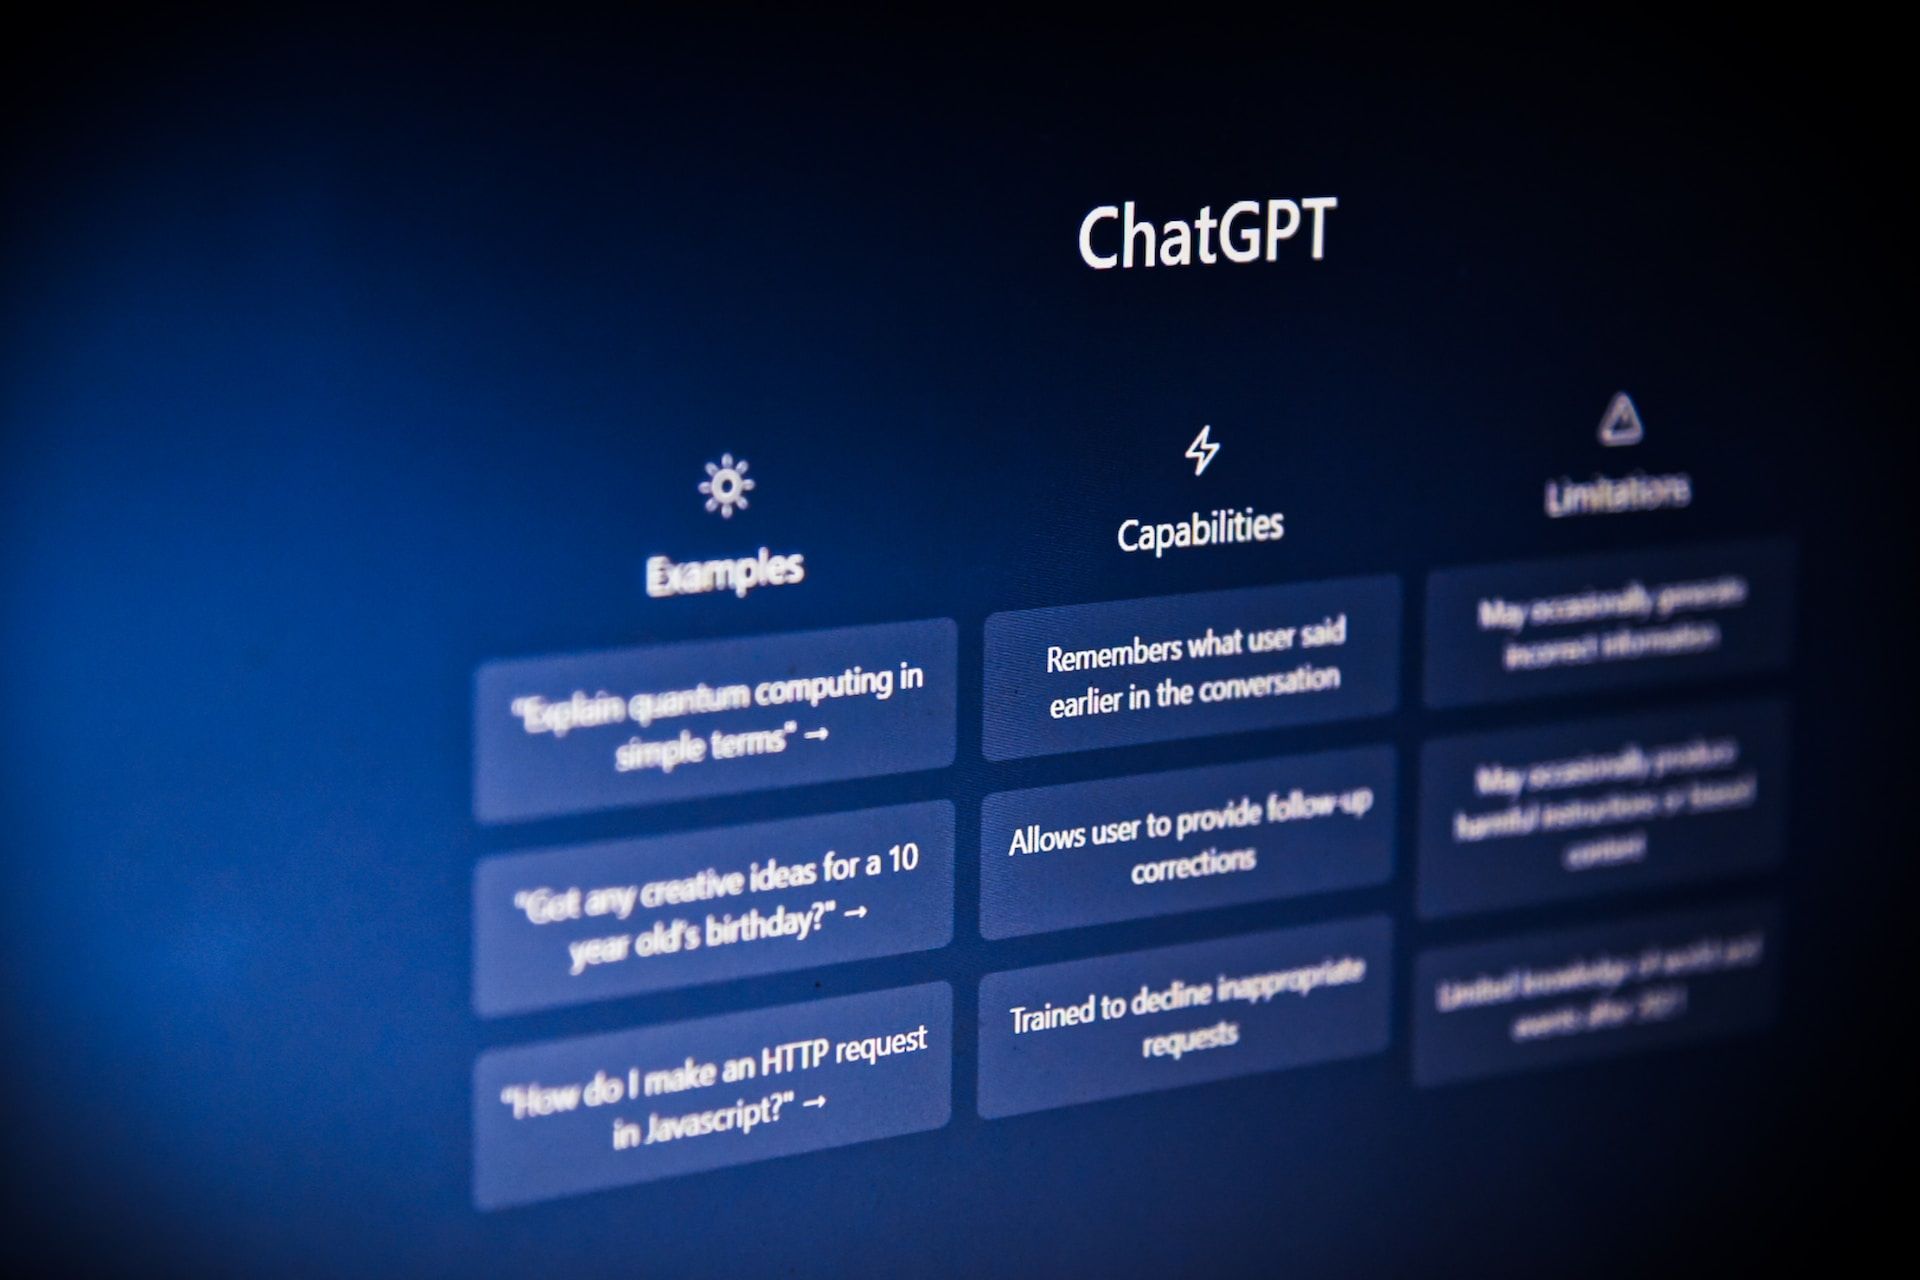 How to Create a Chatbot With the ChatGPT API